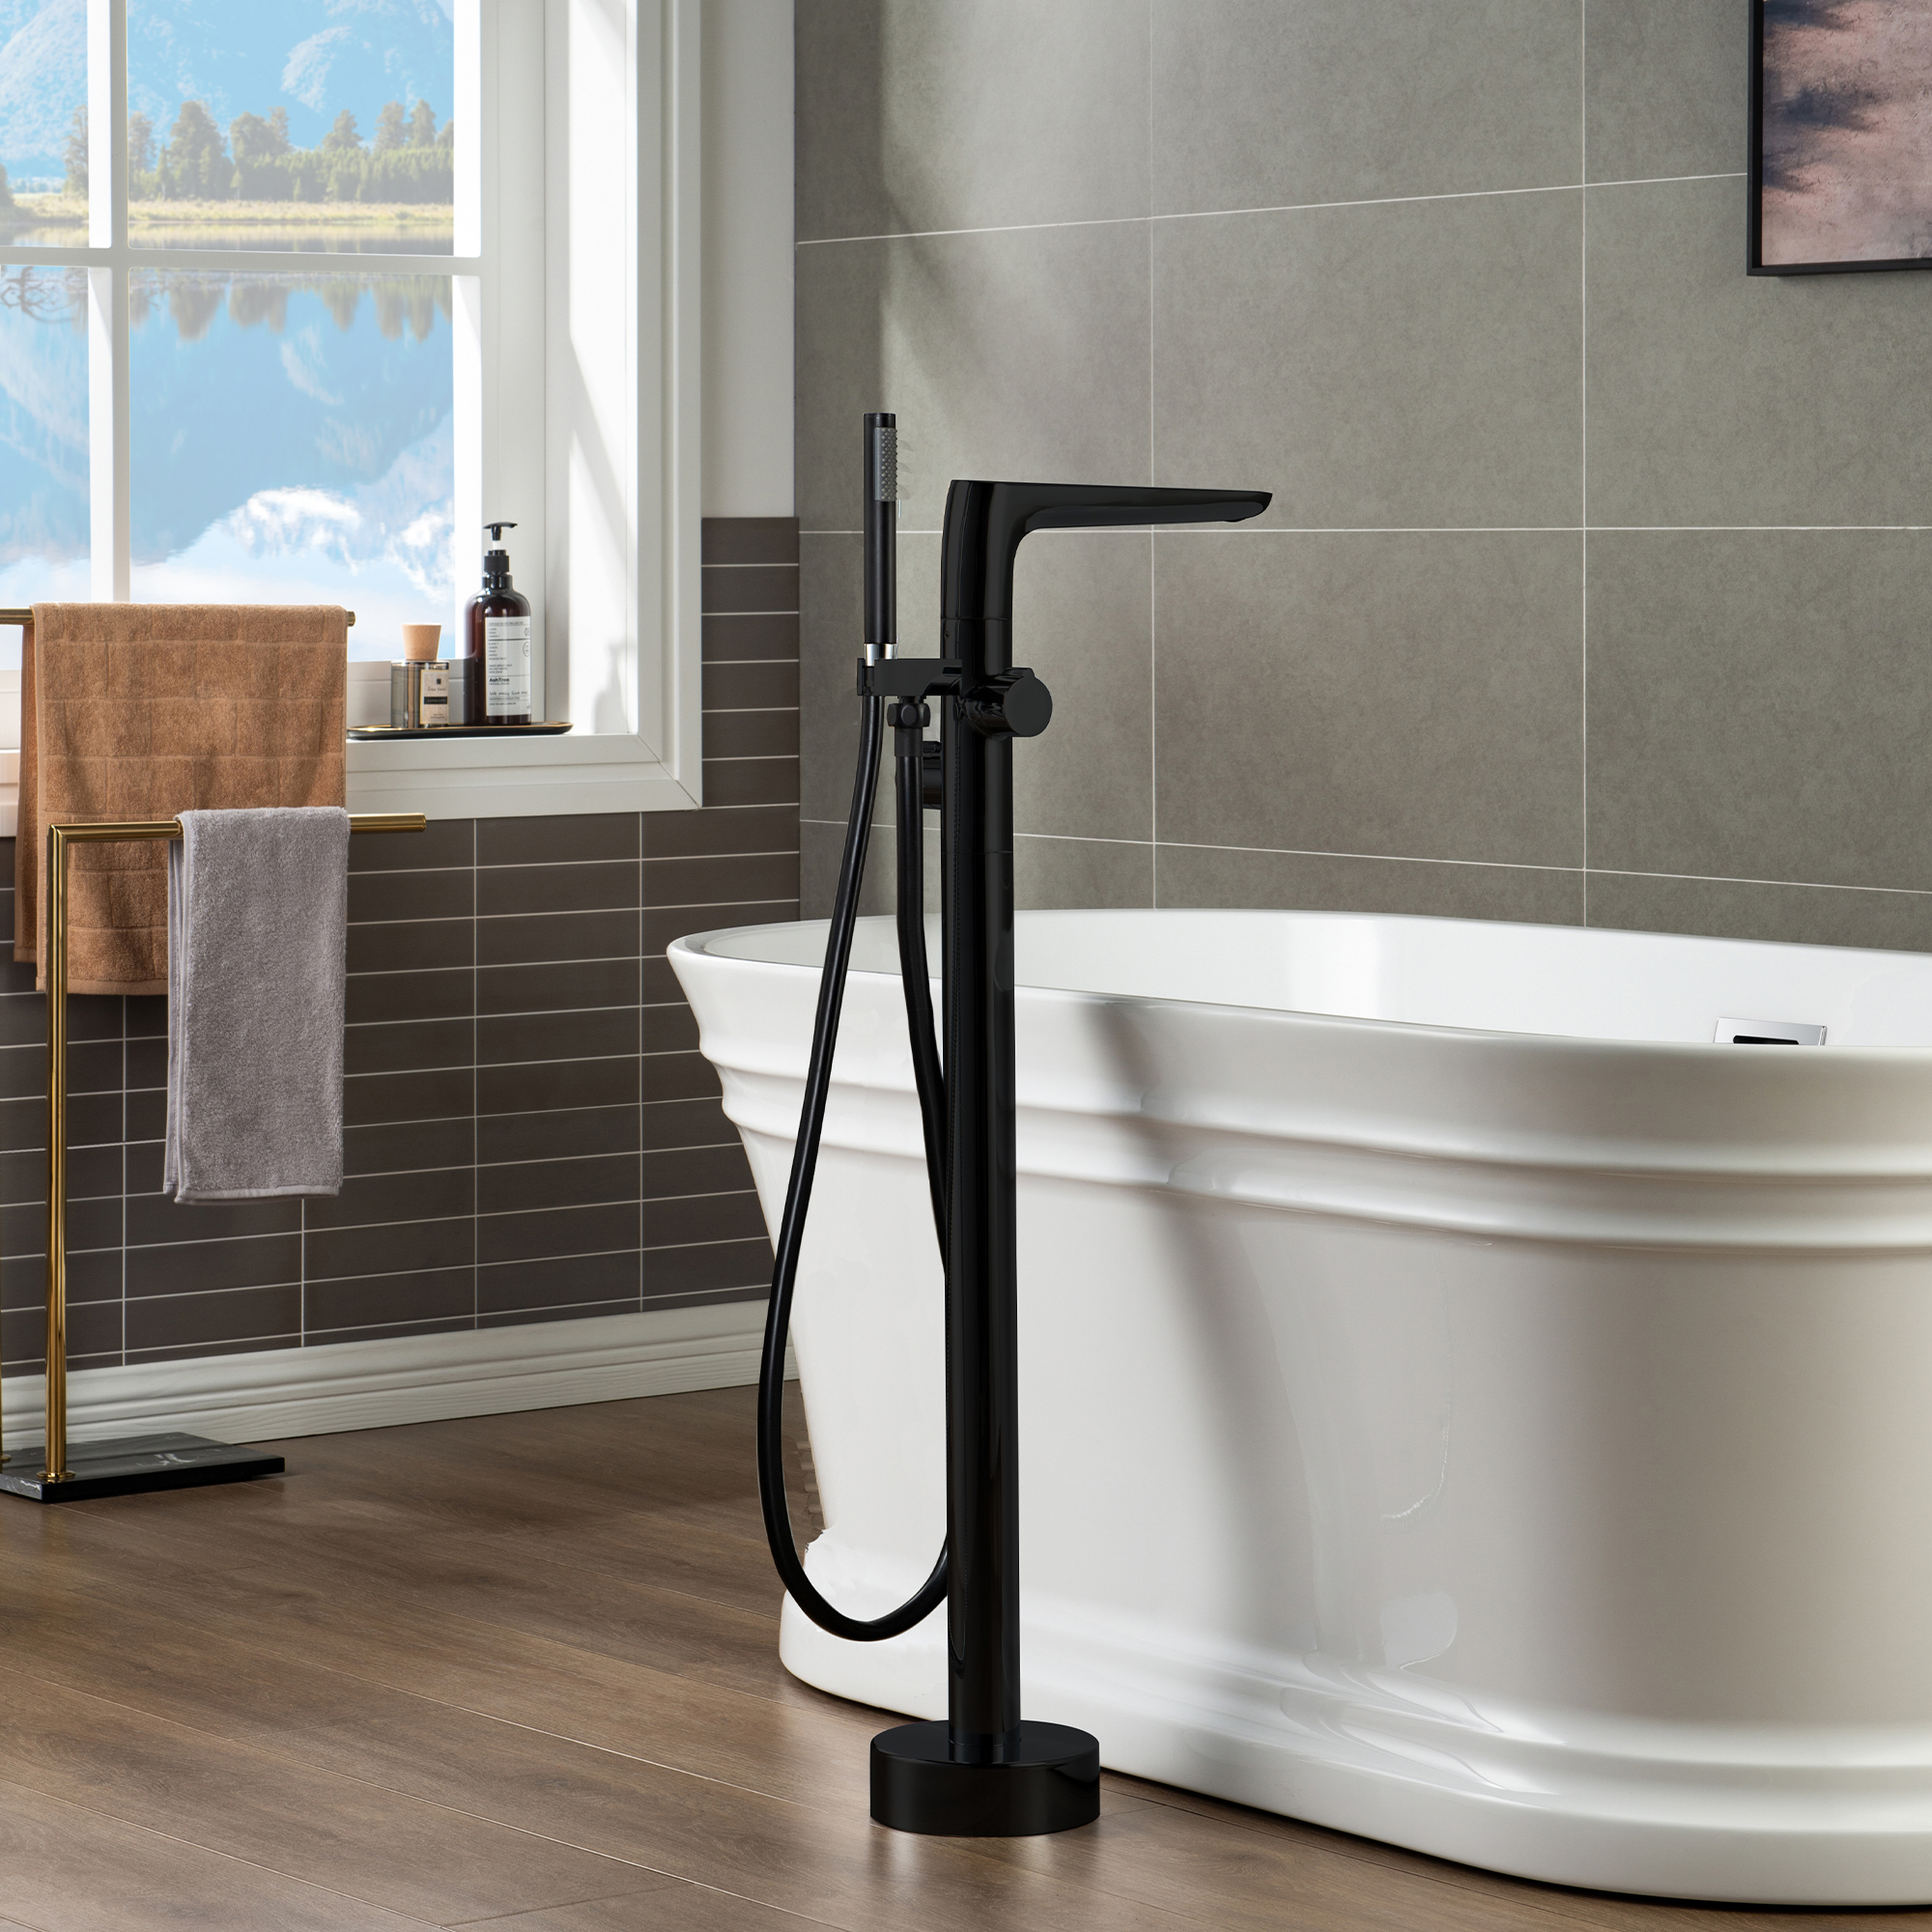  WOODBRIDGE F0015BL Contemporary Single Handle Floor Mount Freestanding Tub Filler Faucet with Hand shower in Matte Black Finish._12703